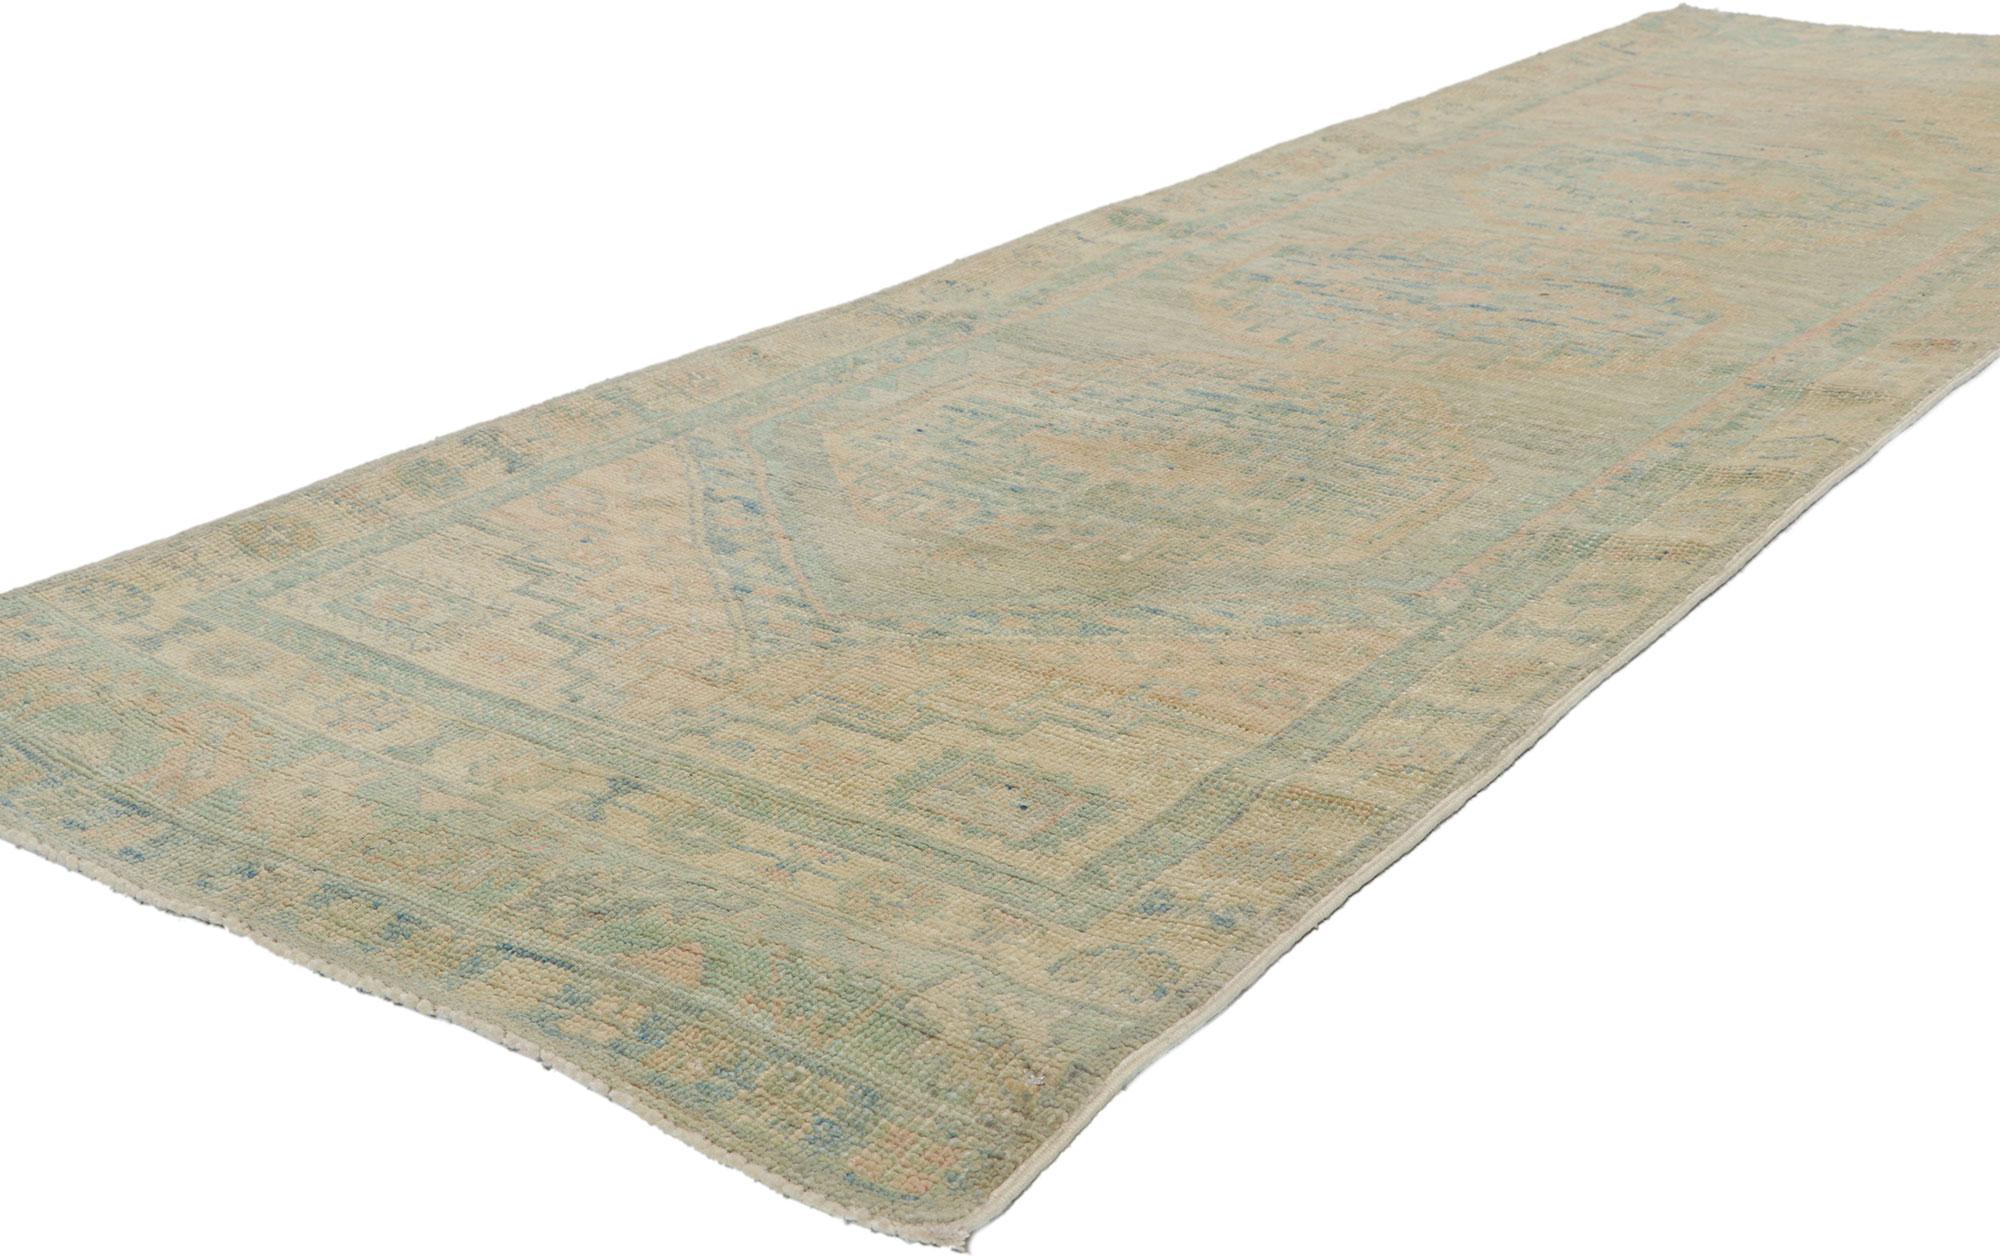 80828 Contemporary Oushak Runner with Modern Vintage Style, 02'08 x 07'11. Polished and playful, this hand-knotted wool contemporary Contemporary Oushak runner beautifully embodies a modern style. With elements of comfort, modern style and